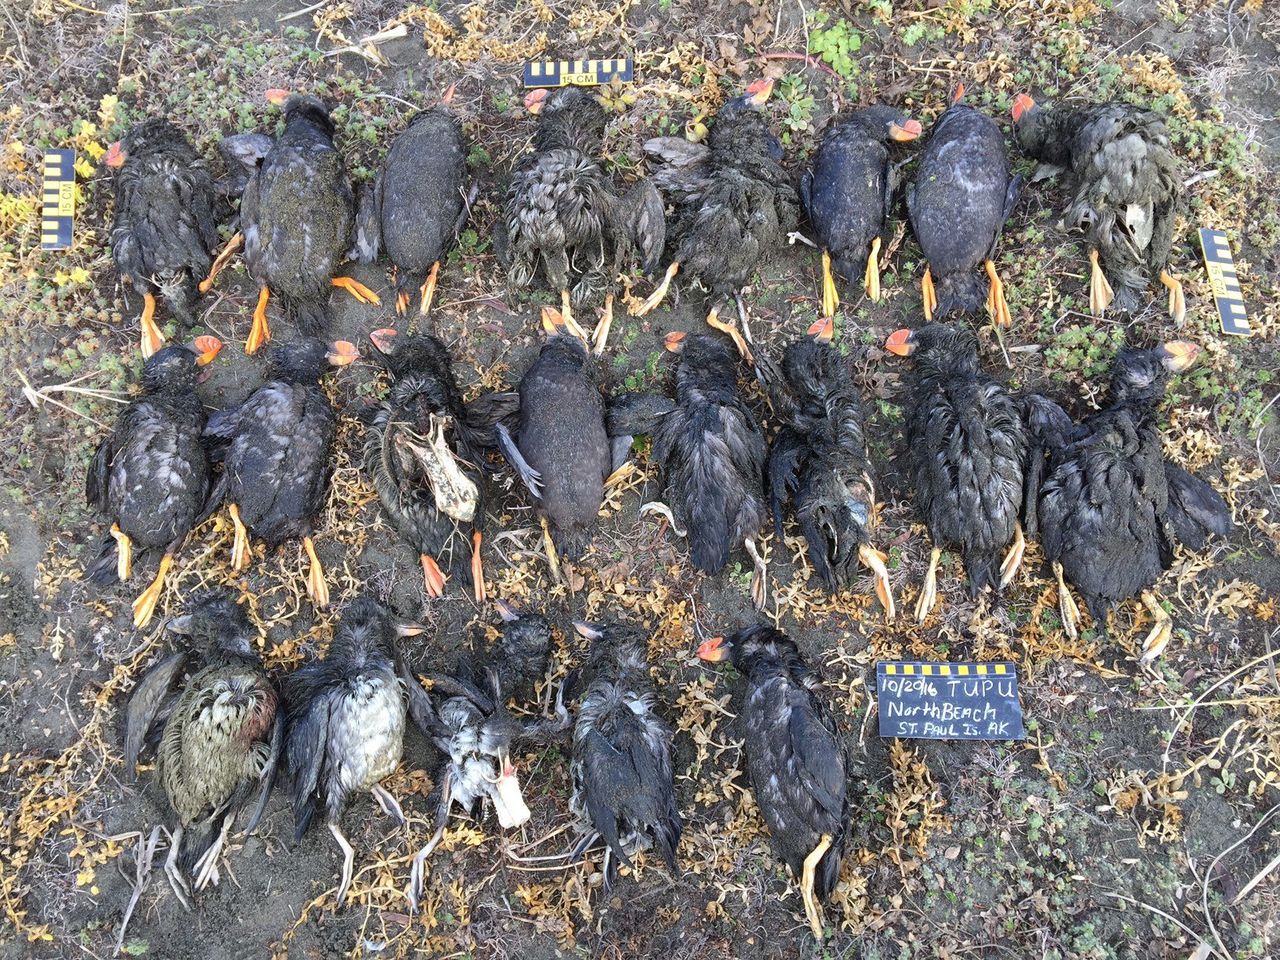 Some of the puffins found dead in St. Paul this October.